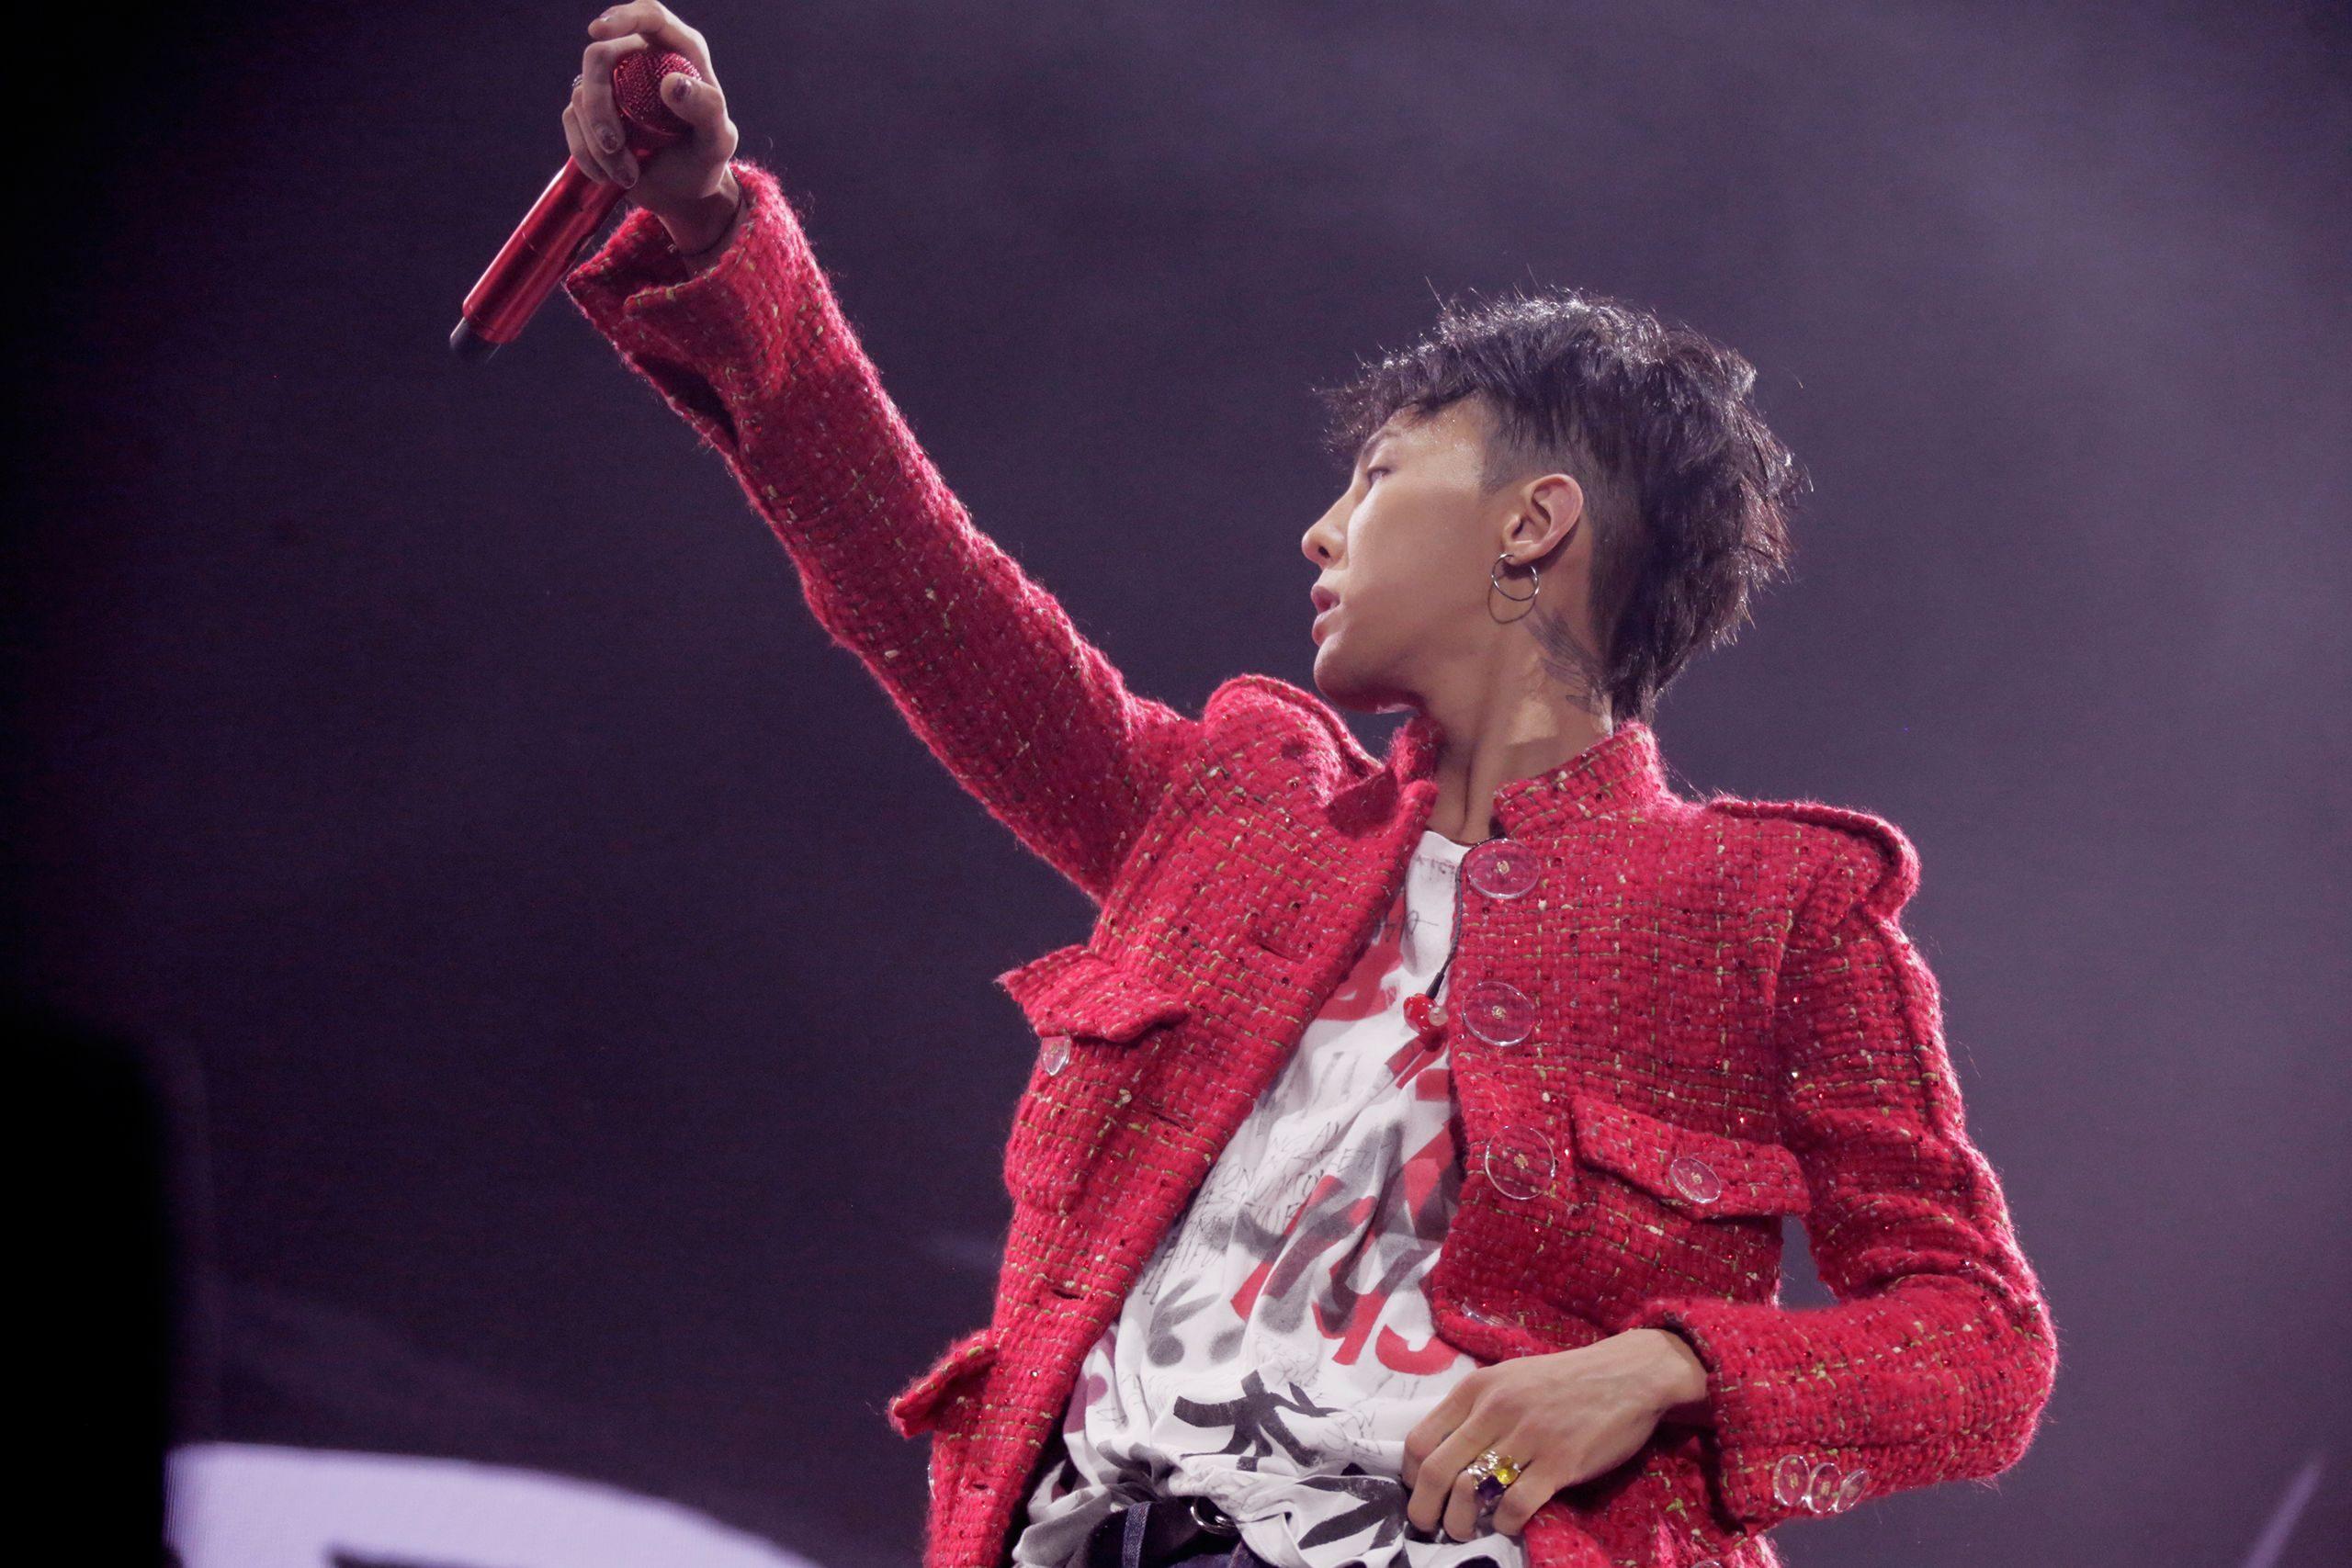 Chanel's Gabrielle bag with G-Dragon, Willow Smith and Liu Wen